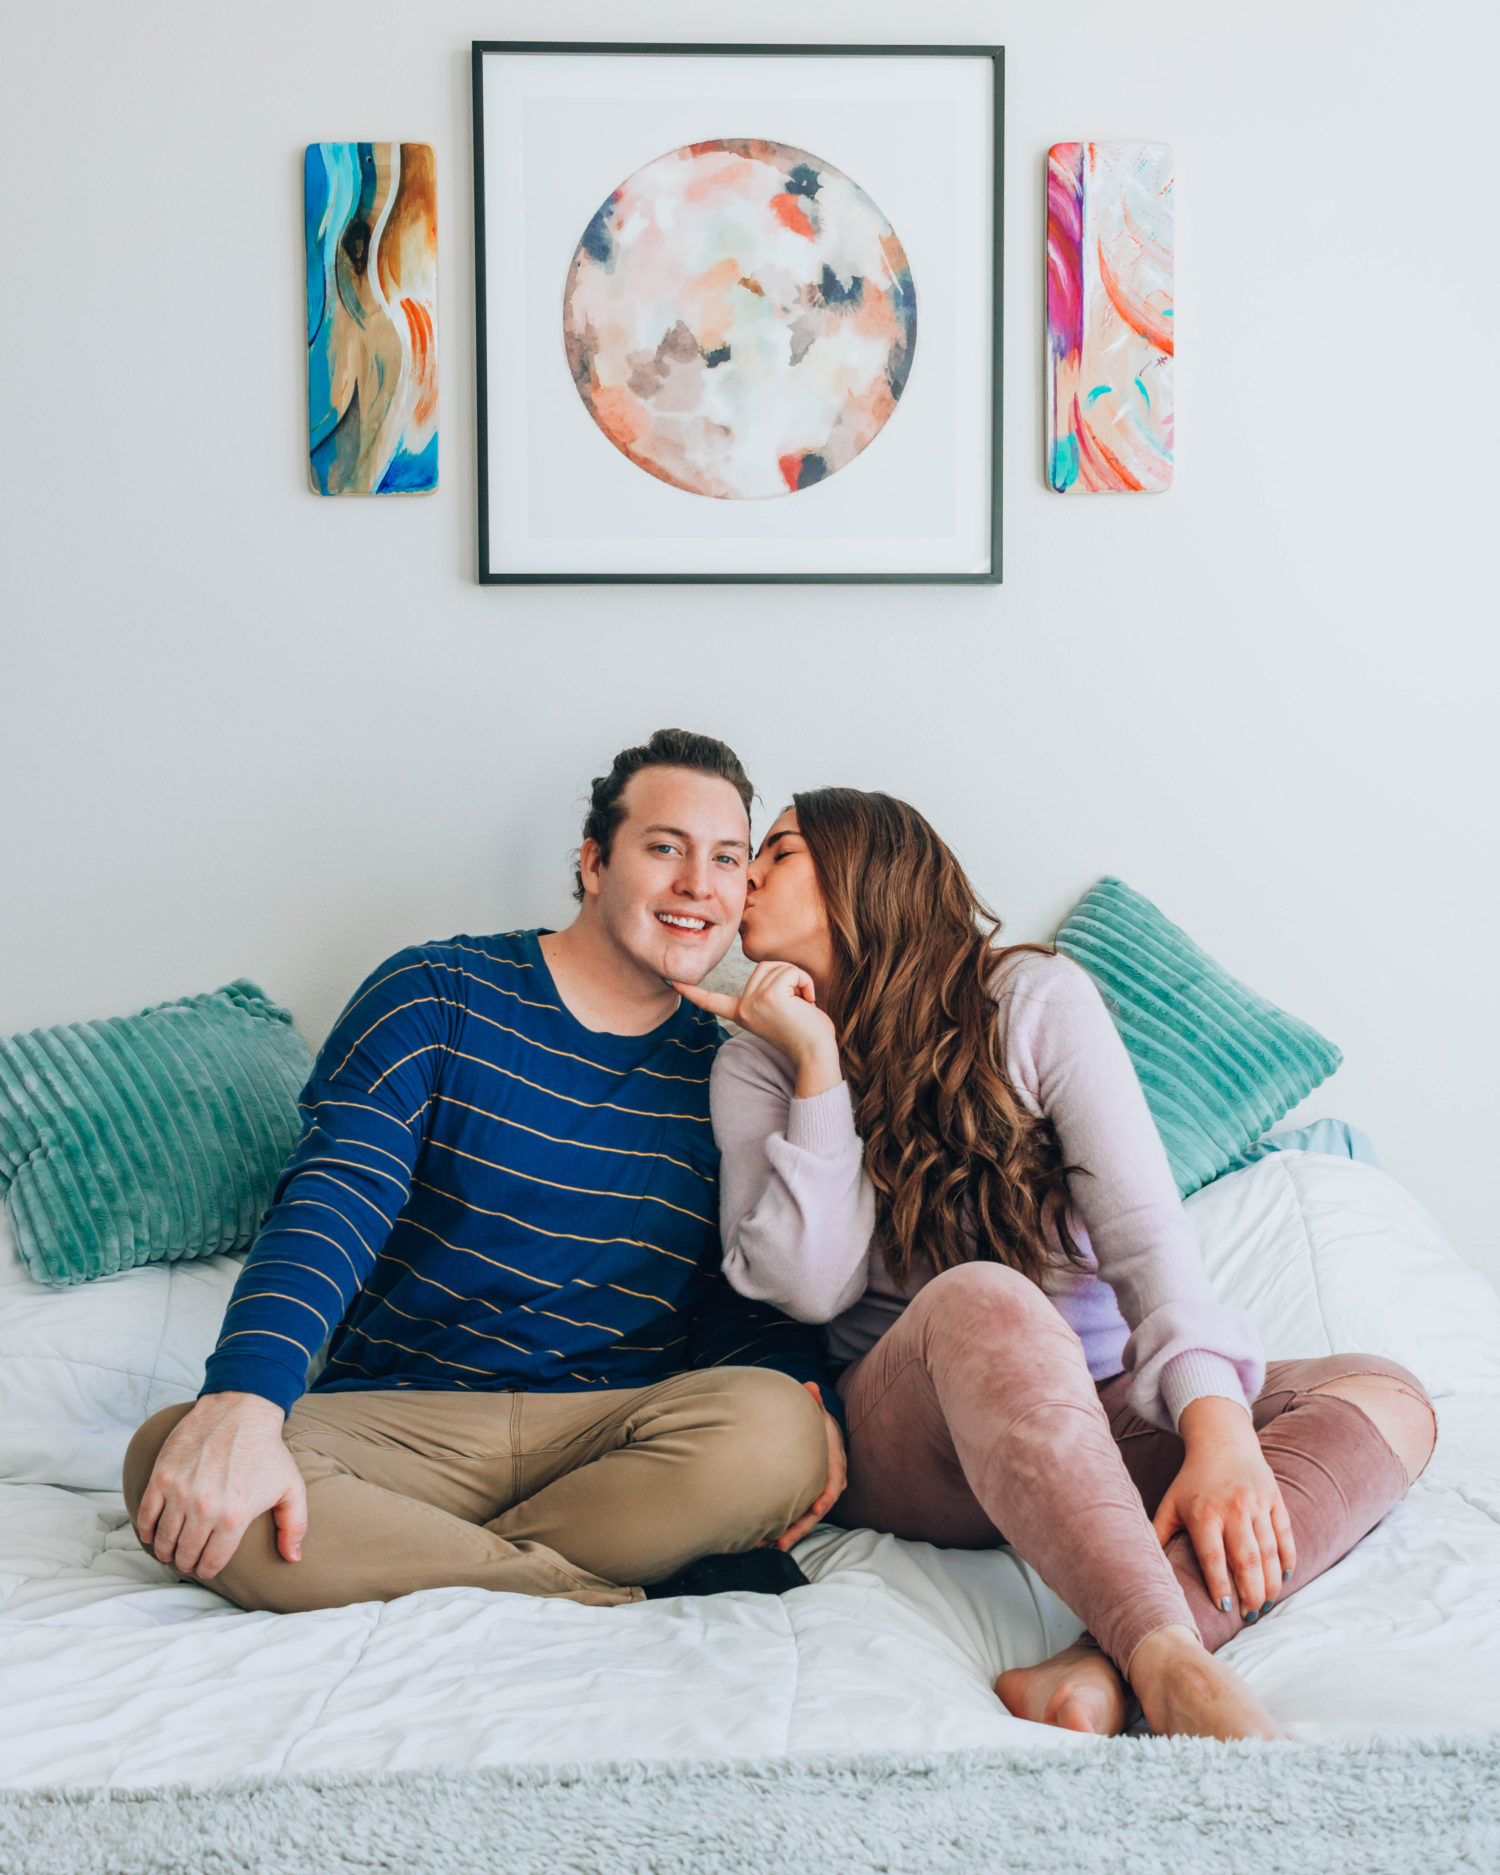 Couple kissing on a bed beneath paintings.